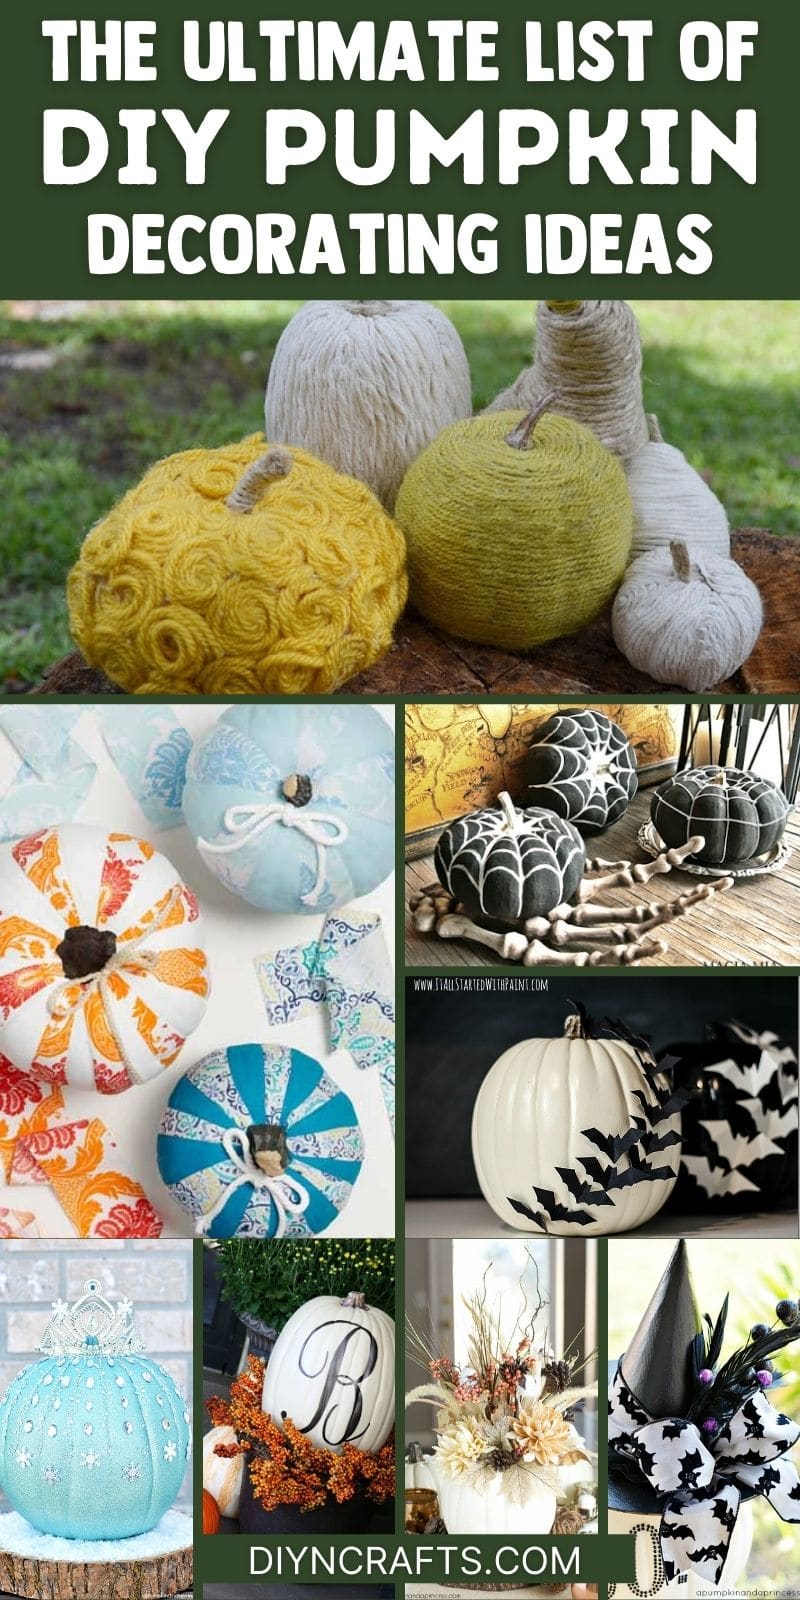 70+ Creative Pumpkin Carving and Decorating Ideas You Can Easily DIY